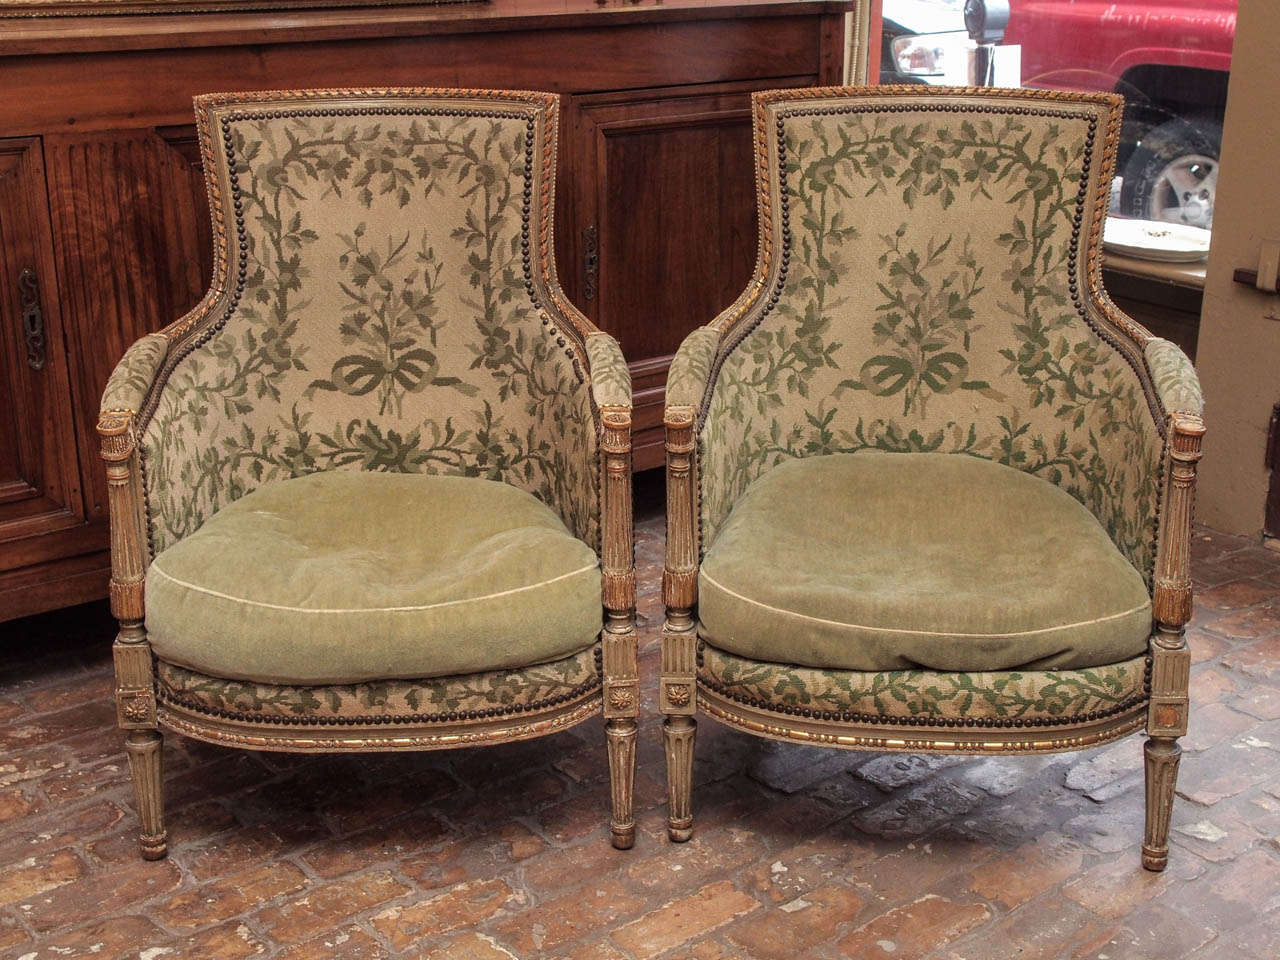 Pair of 19th century French painted and gilded bergeres in the Louis XVI taste, circa 1860.